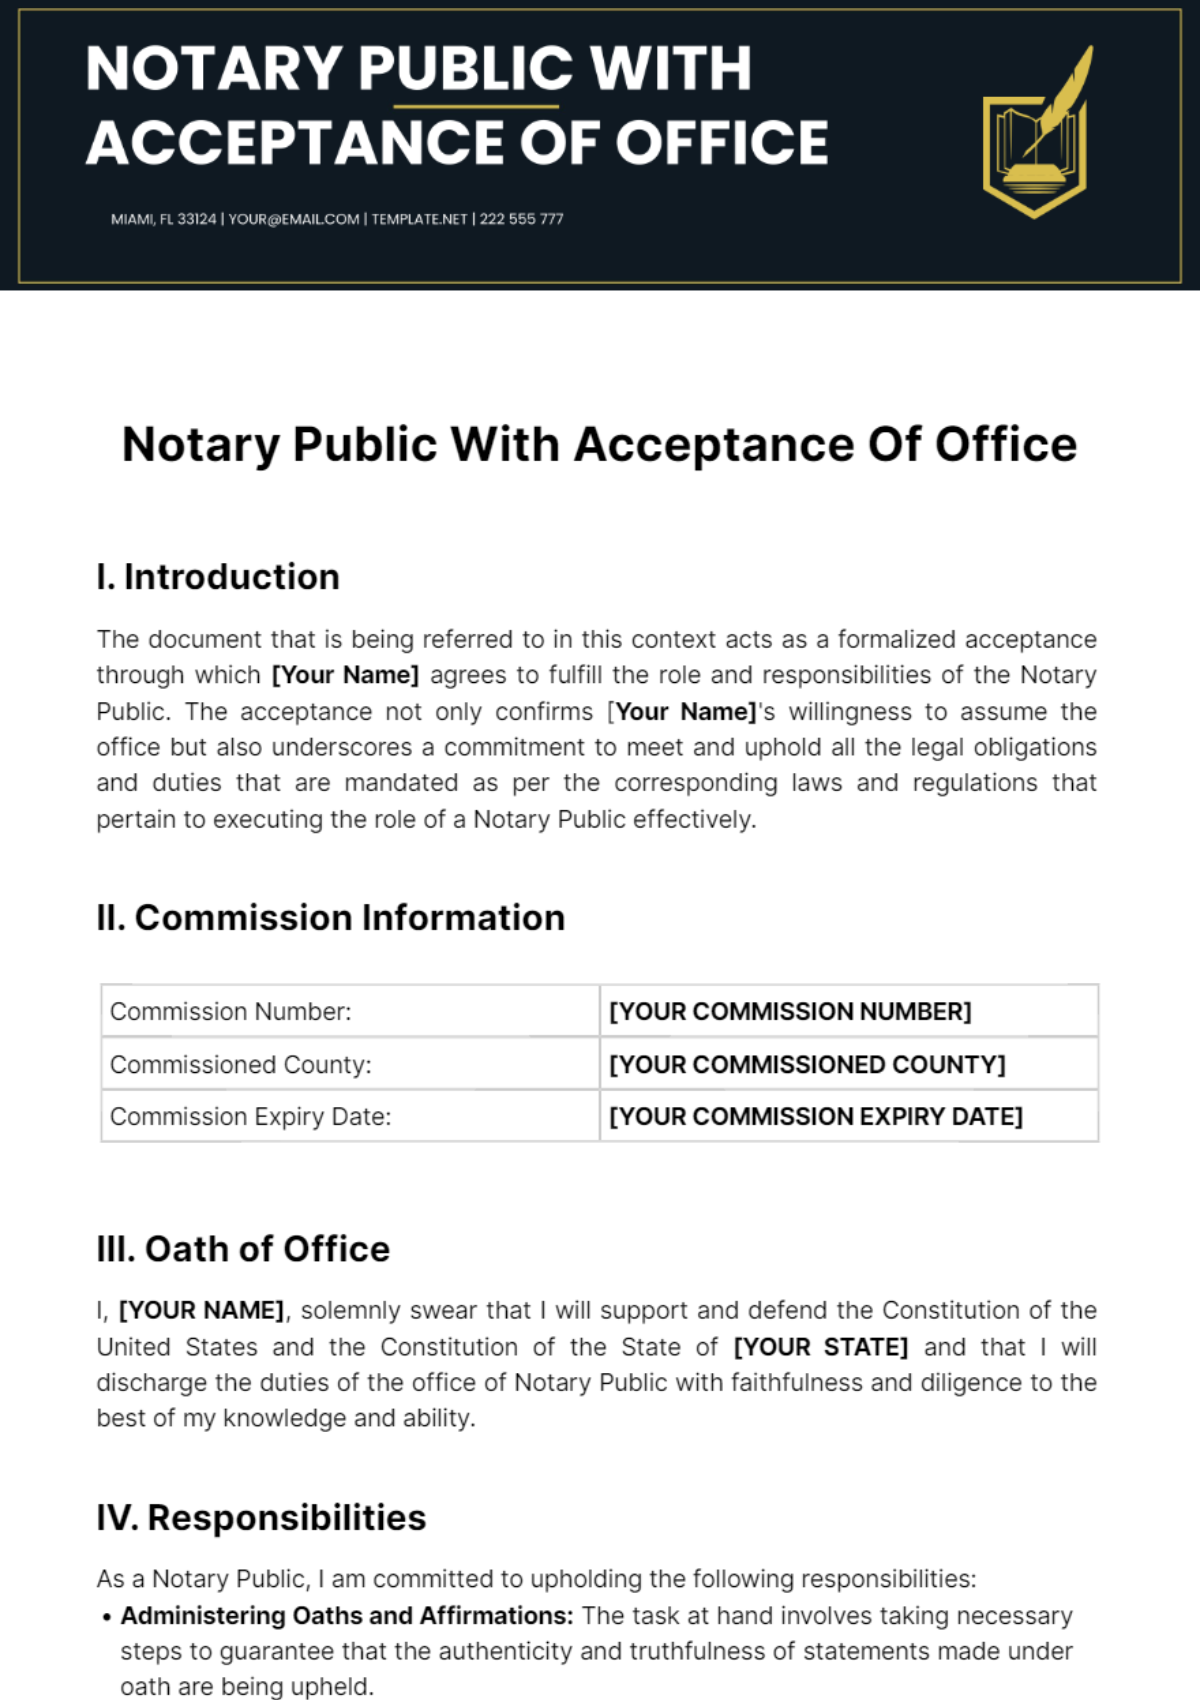 Notary Public With Acceptance Of Office Template